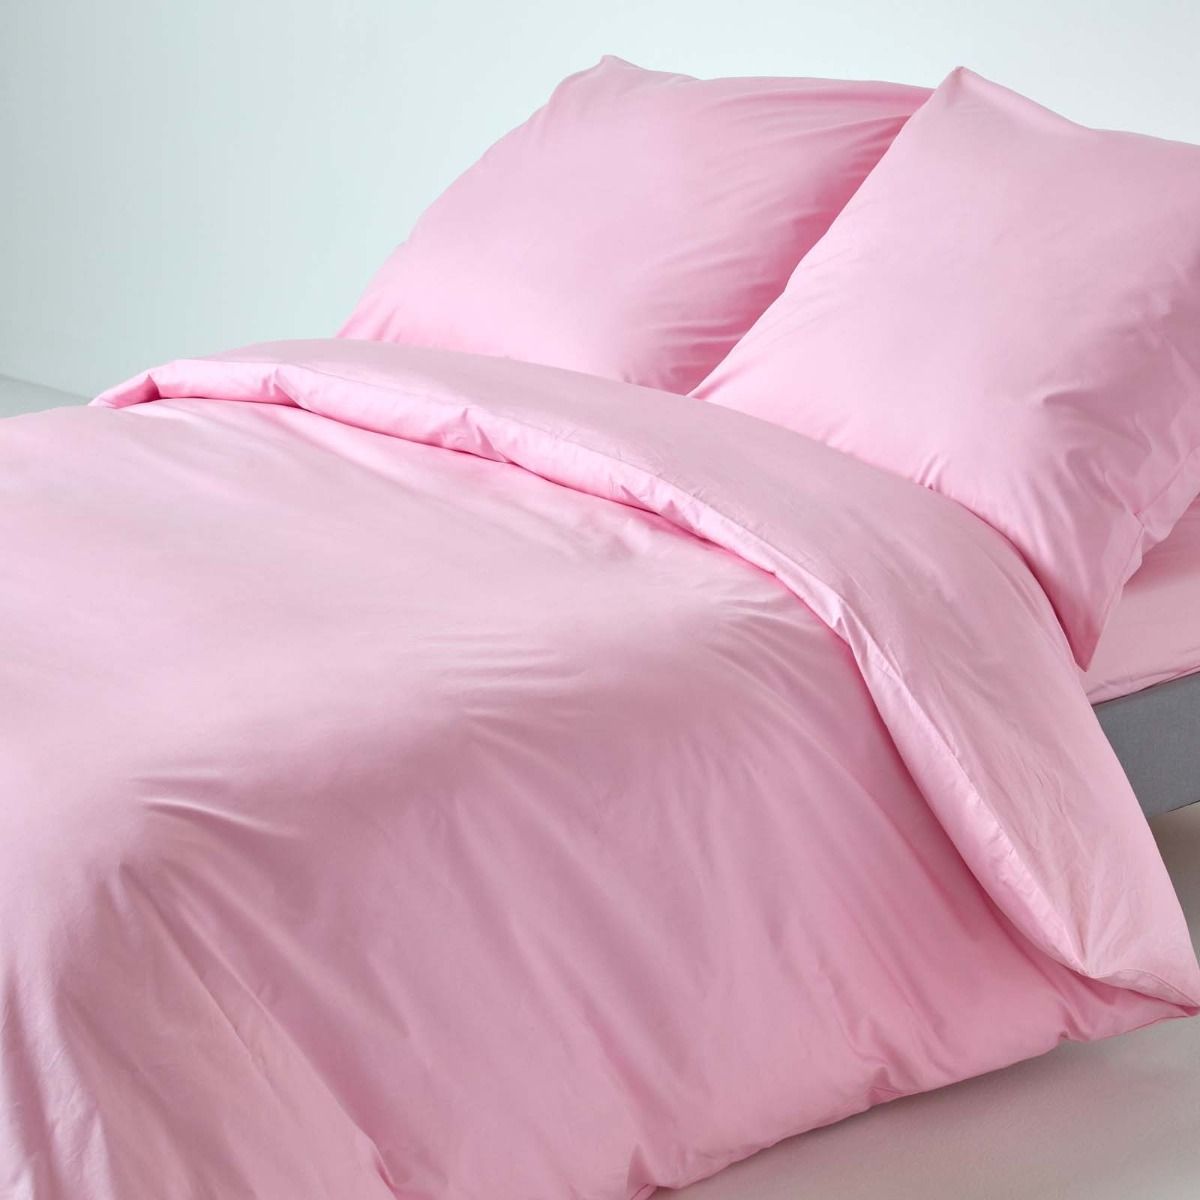 Pink Continental Egyptian Cotton Duvet, White And Pink Duvet Cover Sets